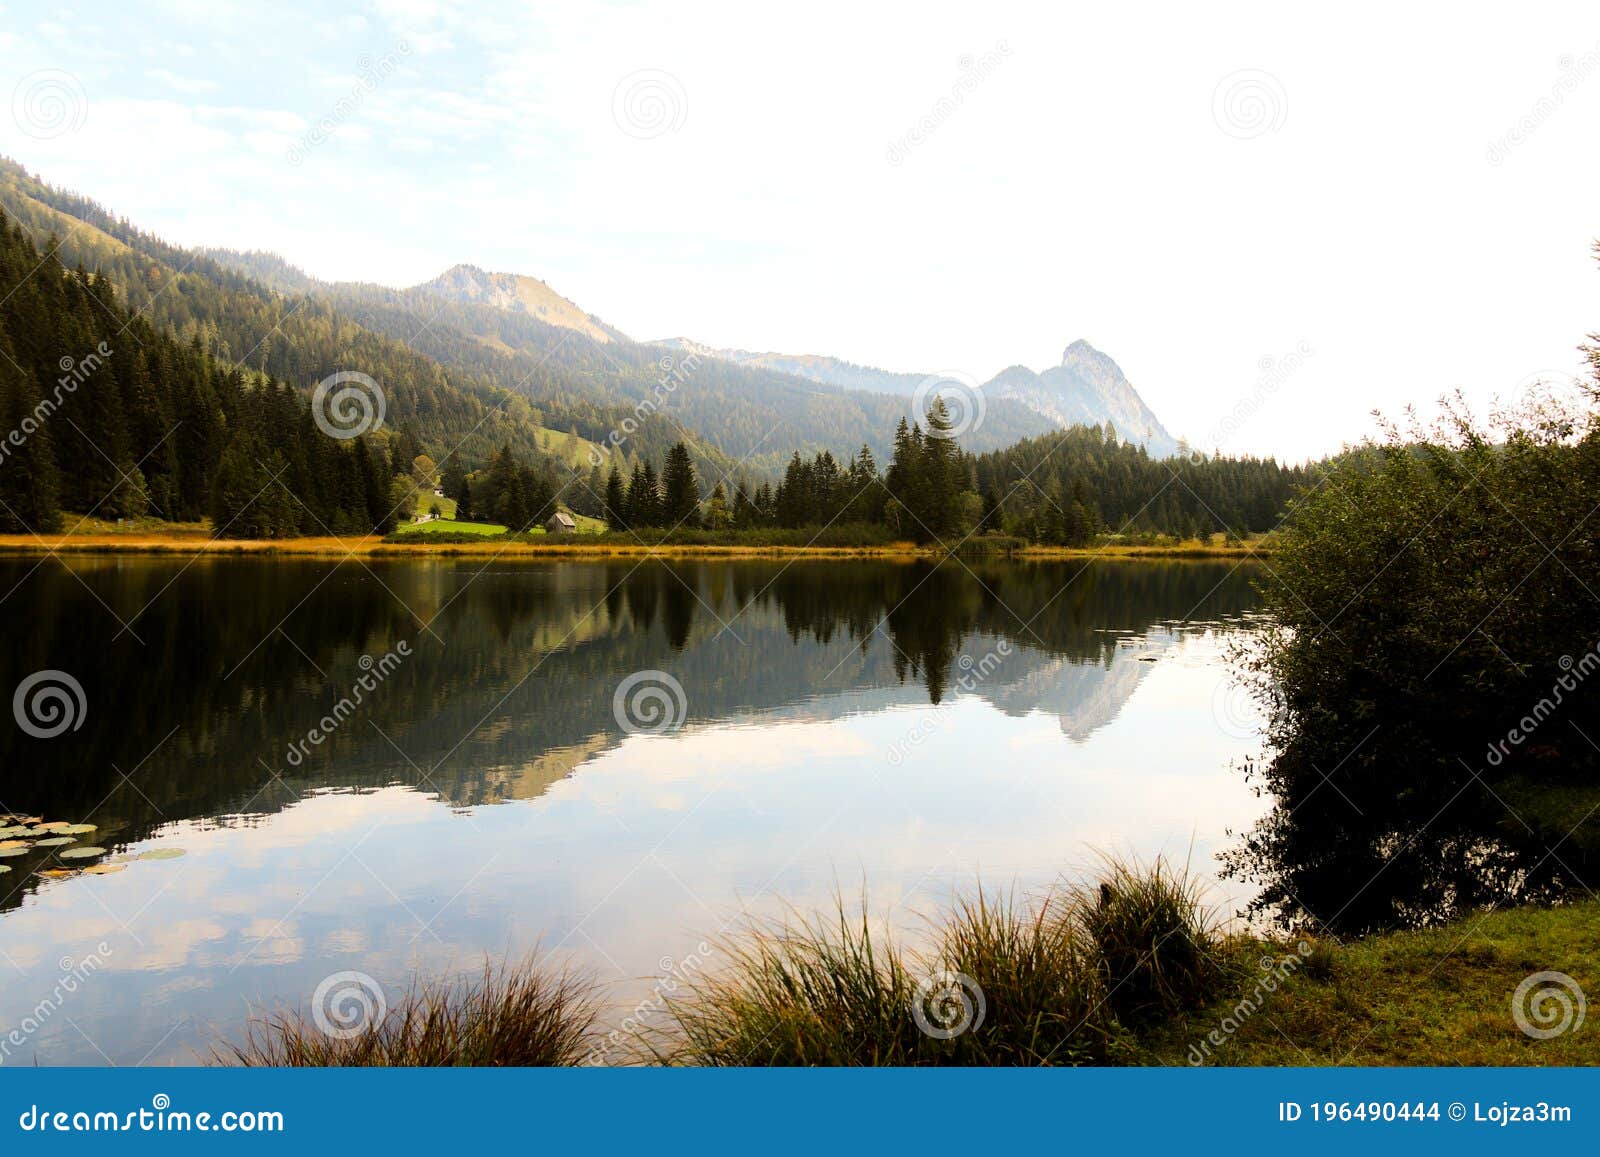 Hidden Lake In Austria Alps Stock Photo Image Of Forests Lake 196490444